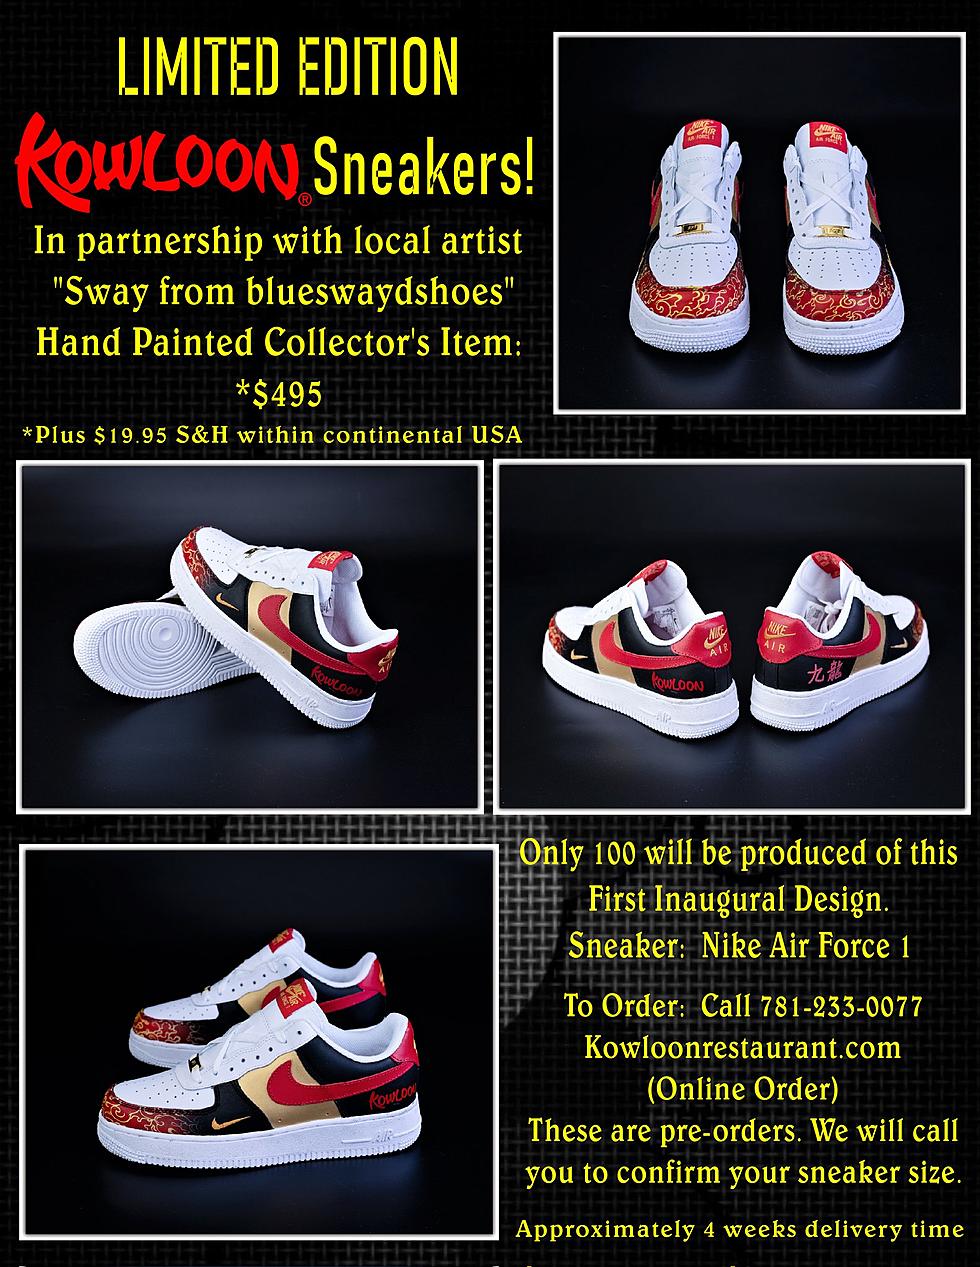 You Can Buy Sneakers Commemorating the Kowloon Chinese Restaurant